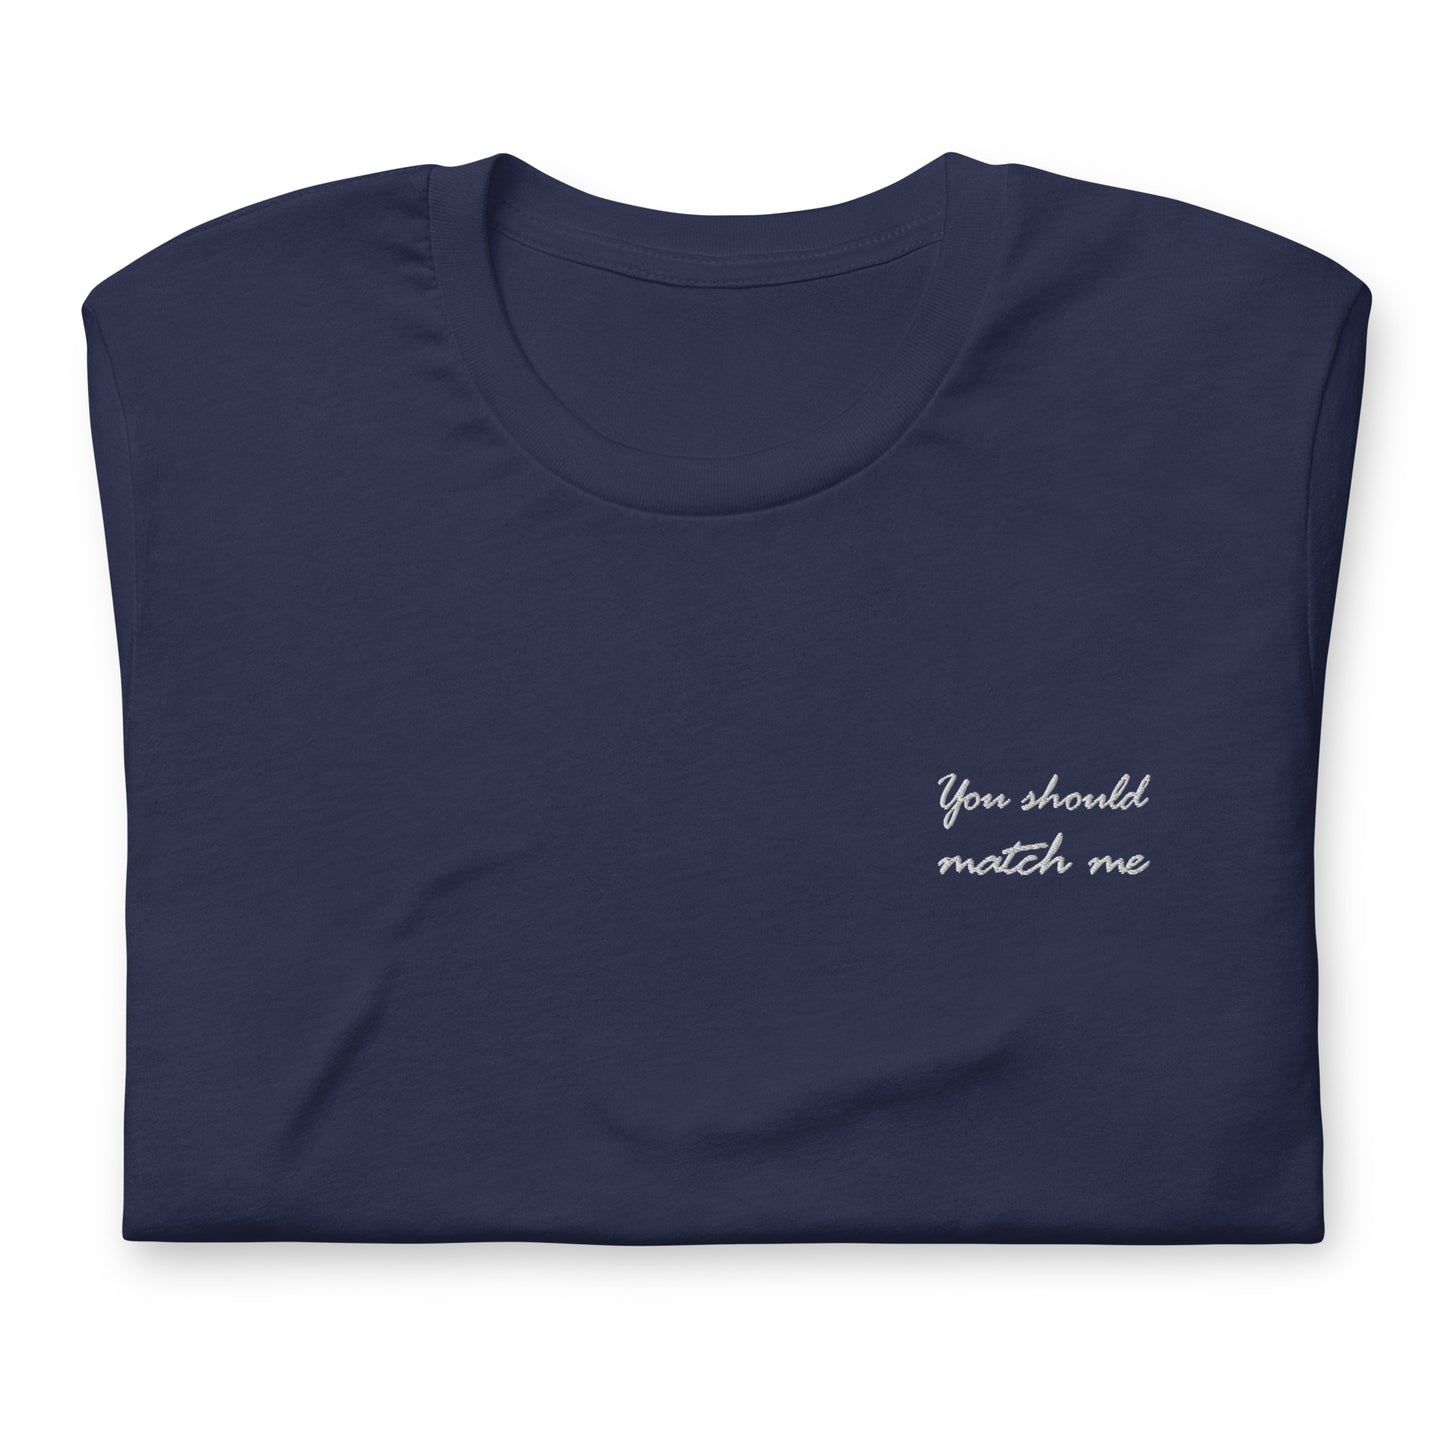 You should match me - embroidered T-shirt